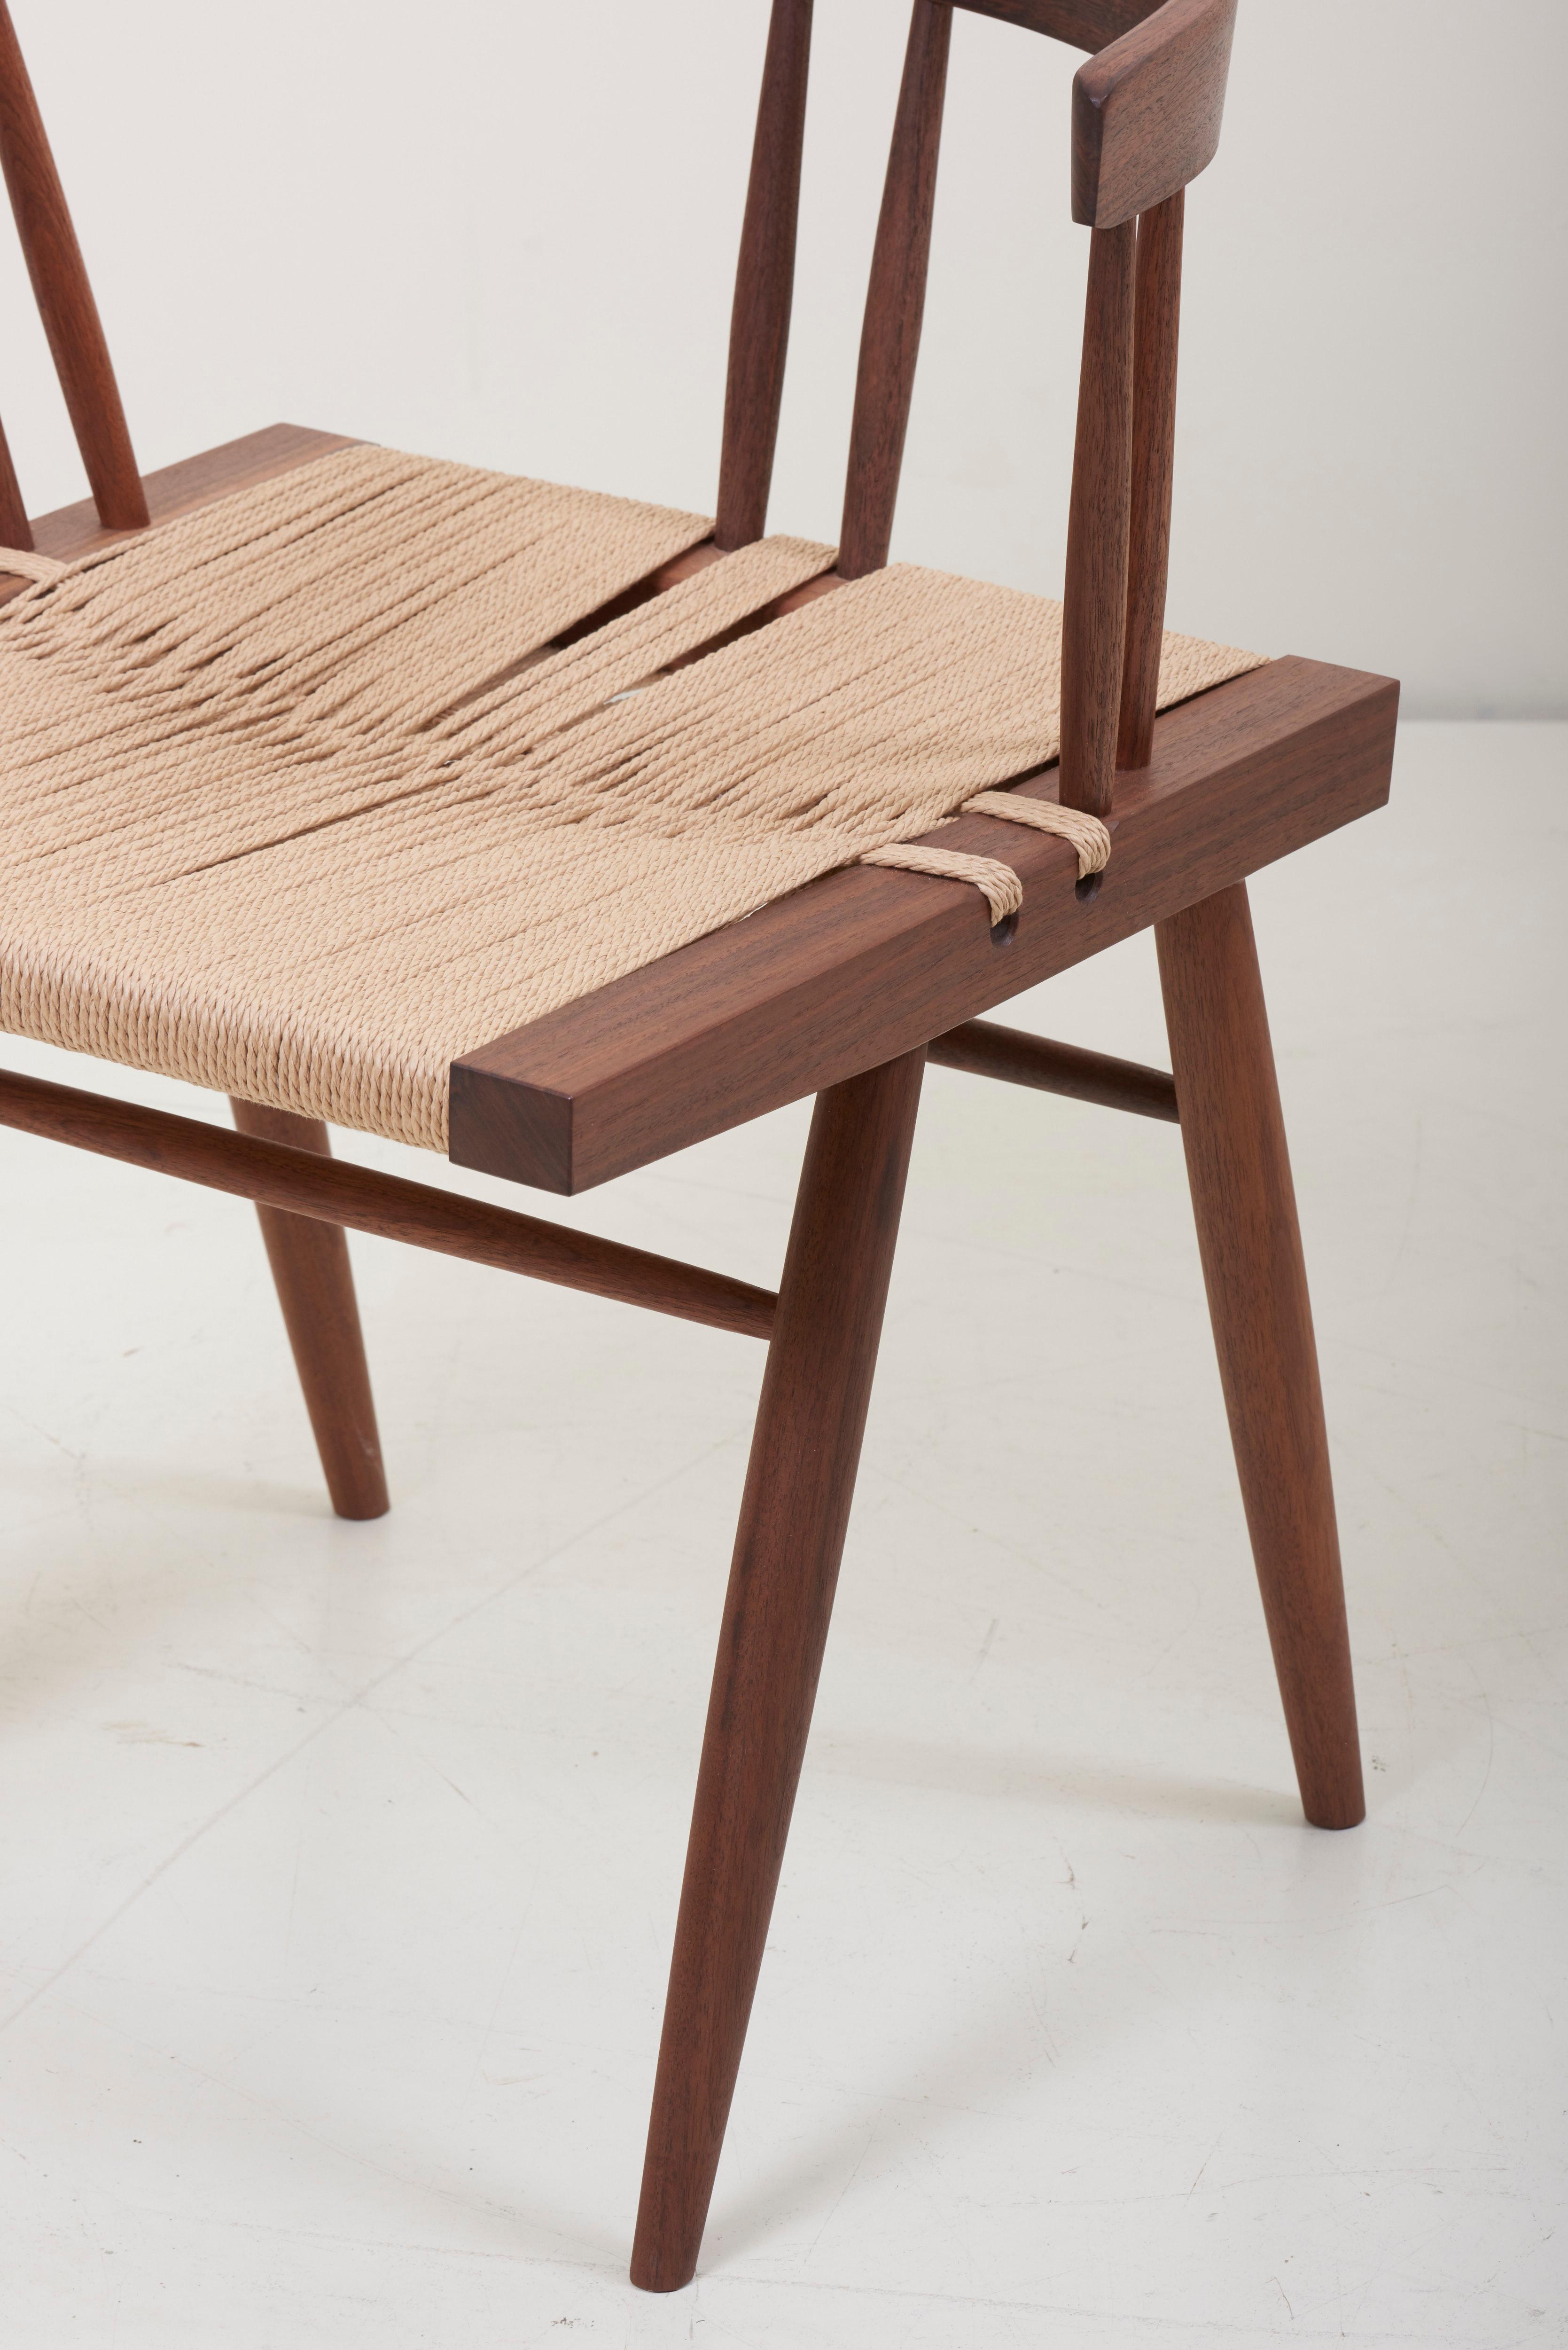 Set of Six Grass Seated Dining Chairs by George Nakashima Studio, US - 2019 4